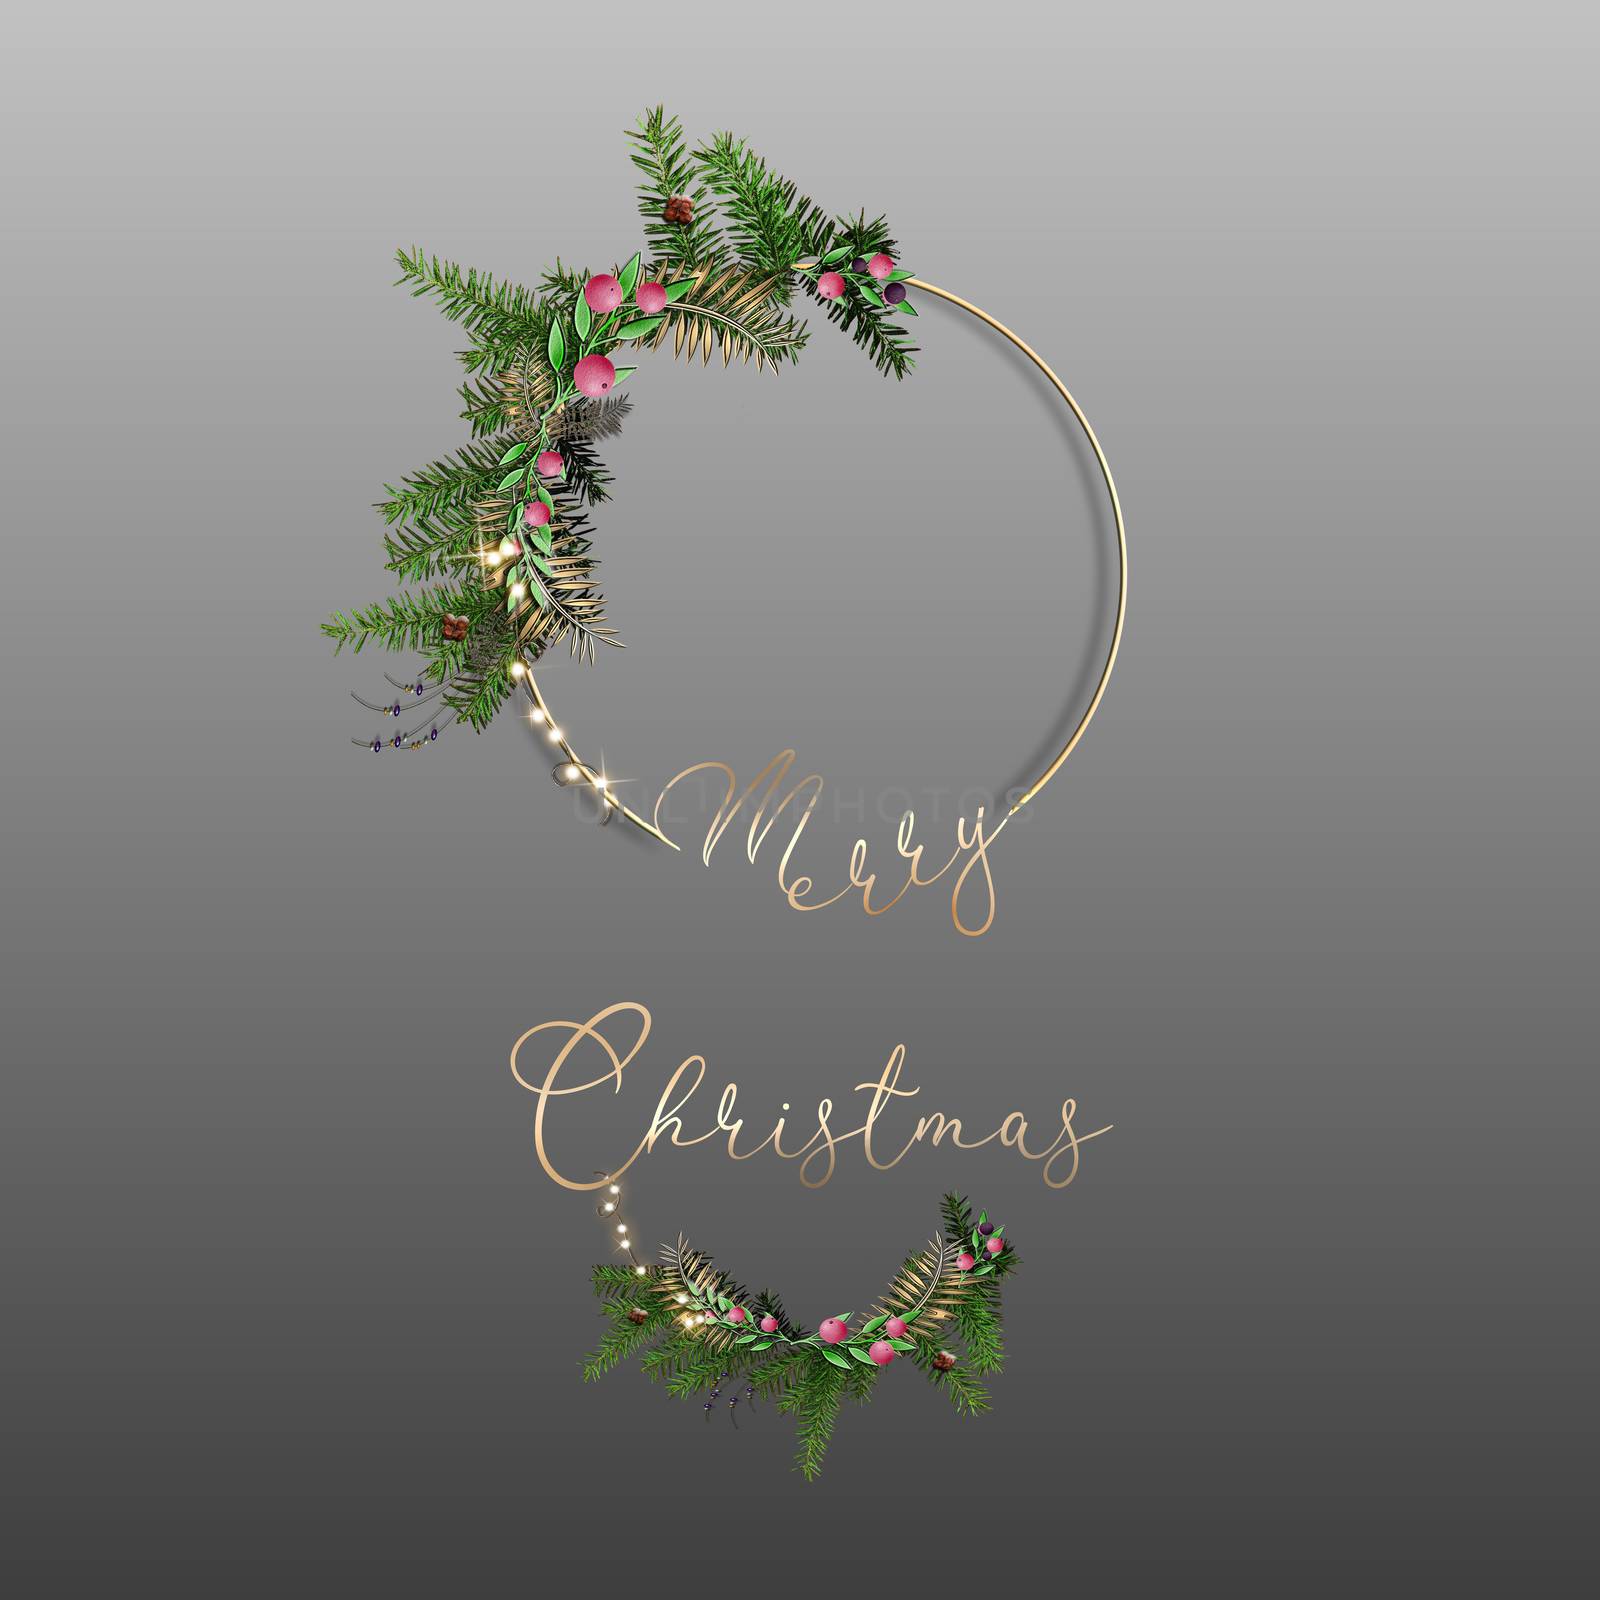 Chritmas wreath for greetings cards by NelliPolk